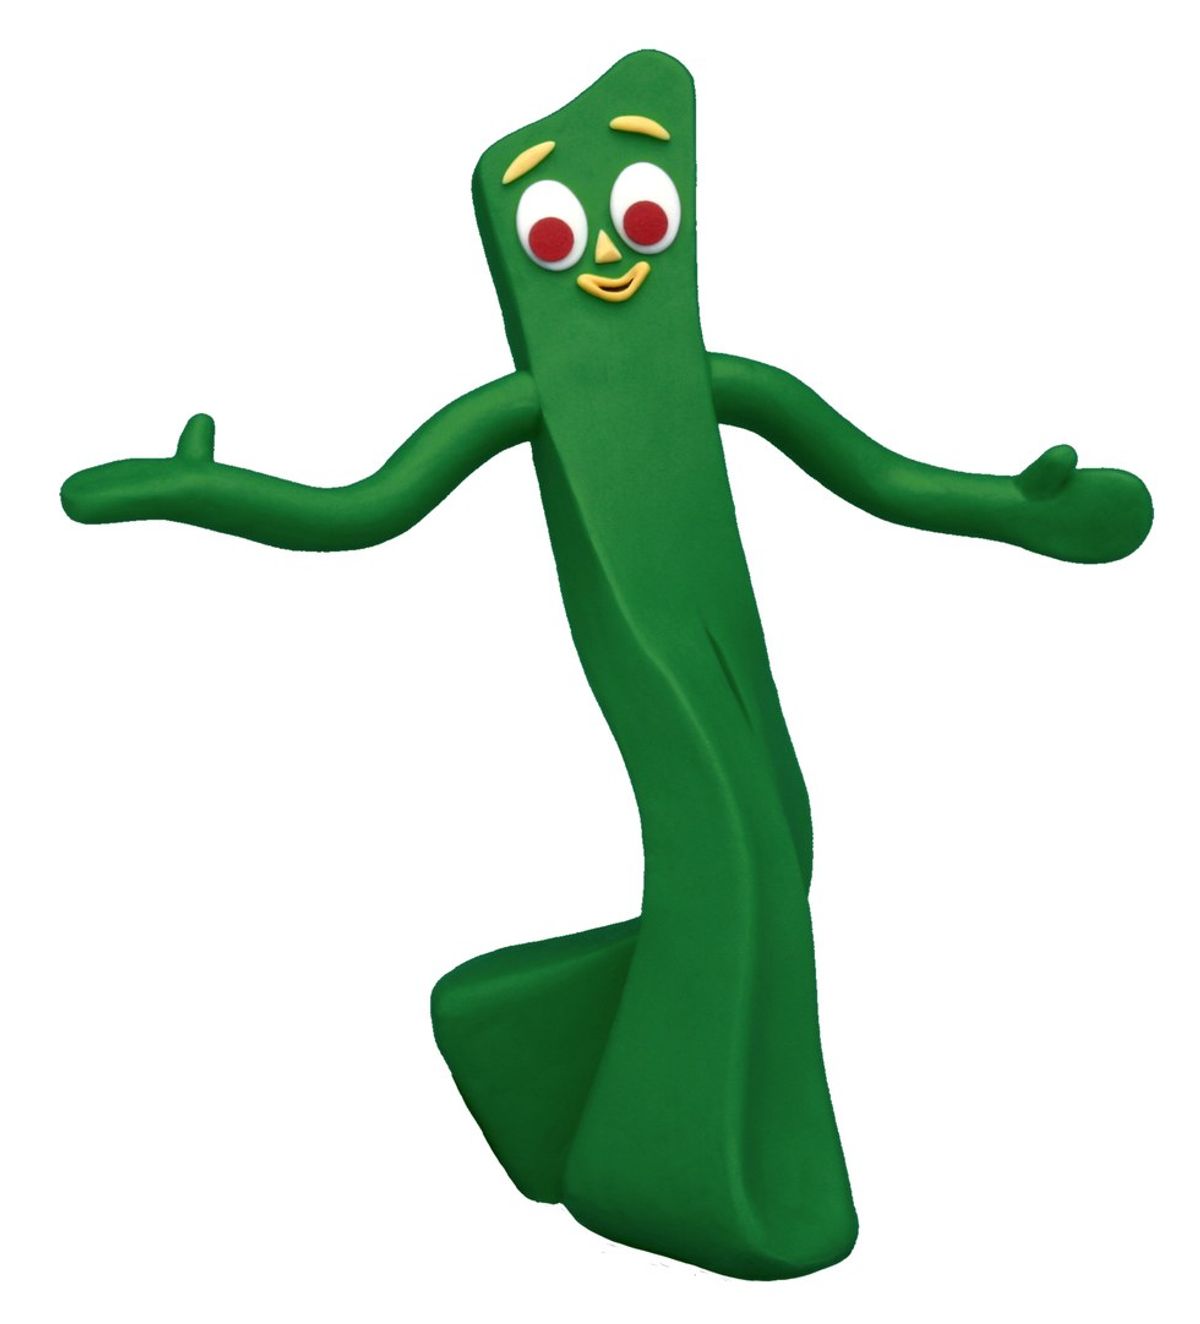 What in the world is a gumby?